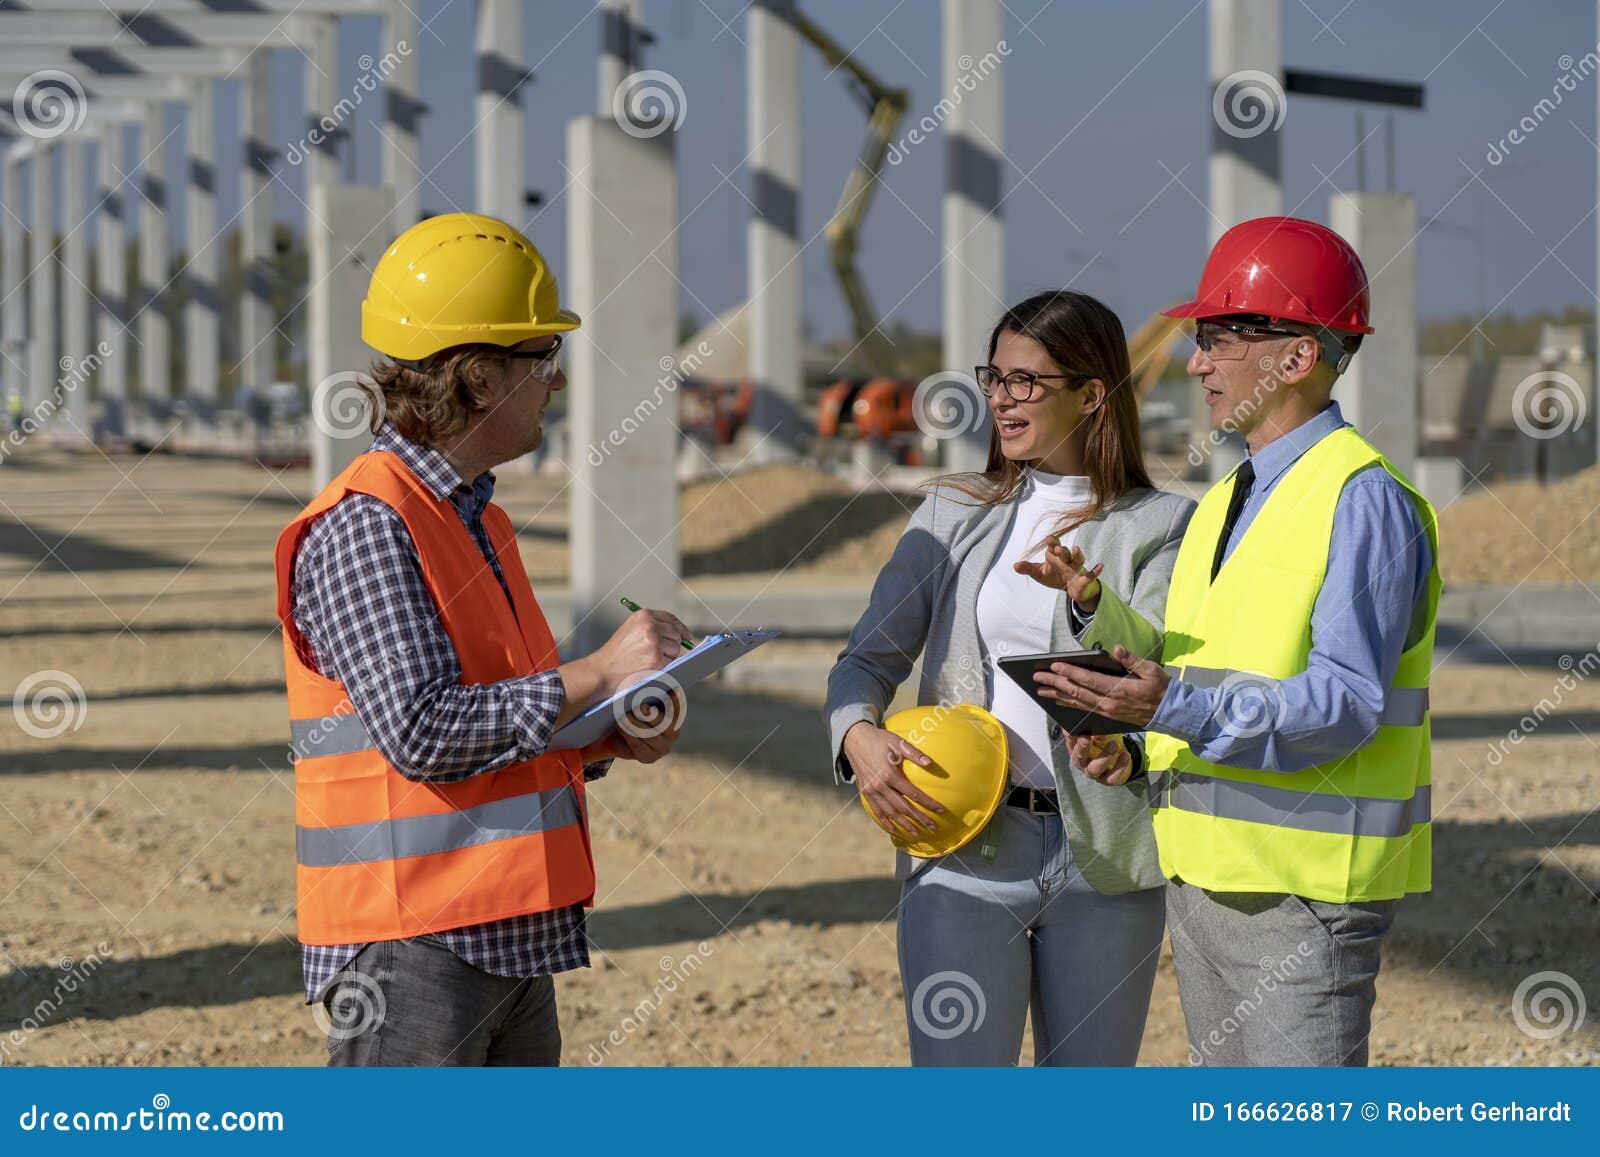 Construction Business Team Standing And Talking On Site Under